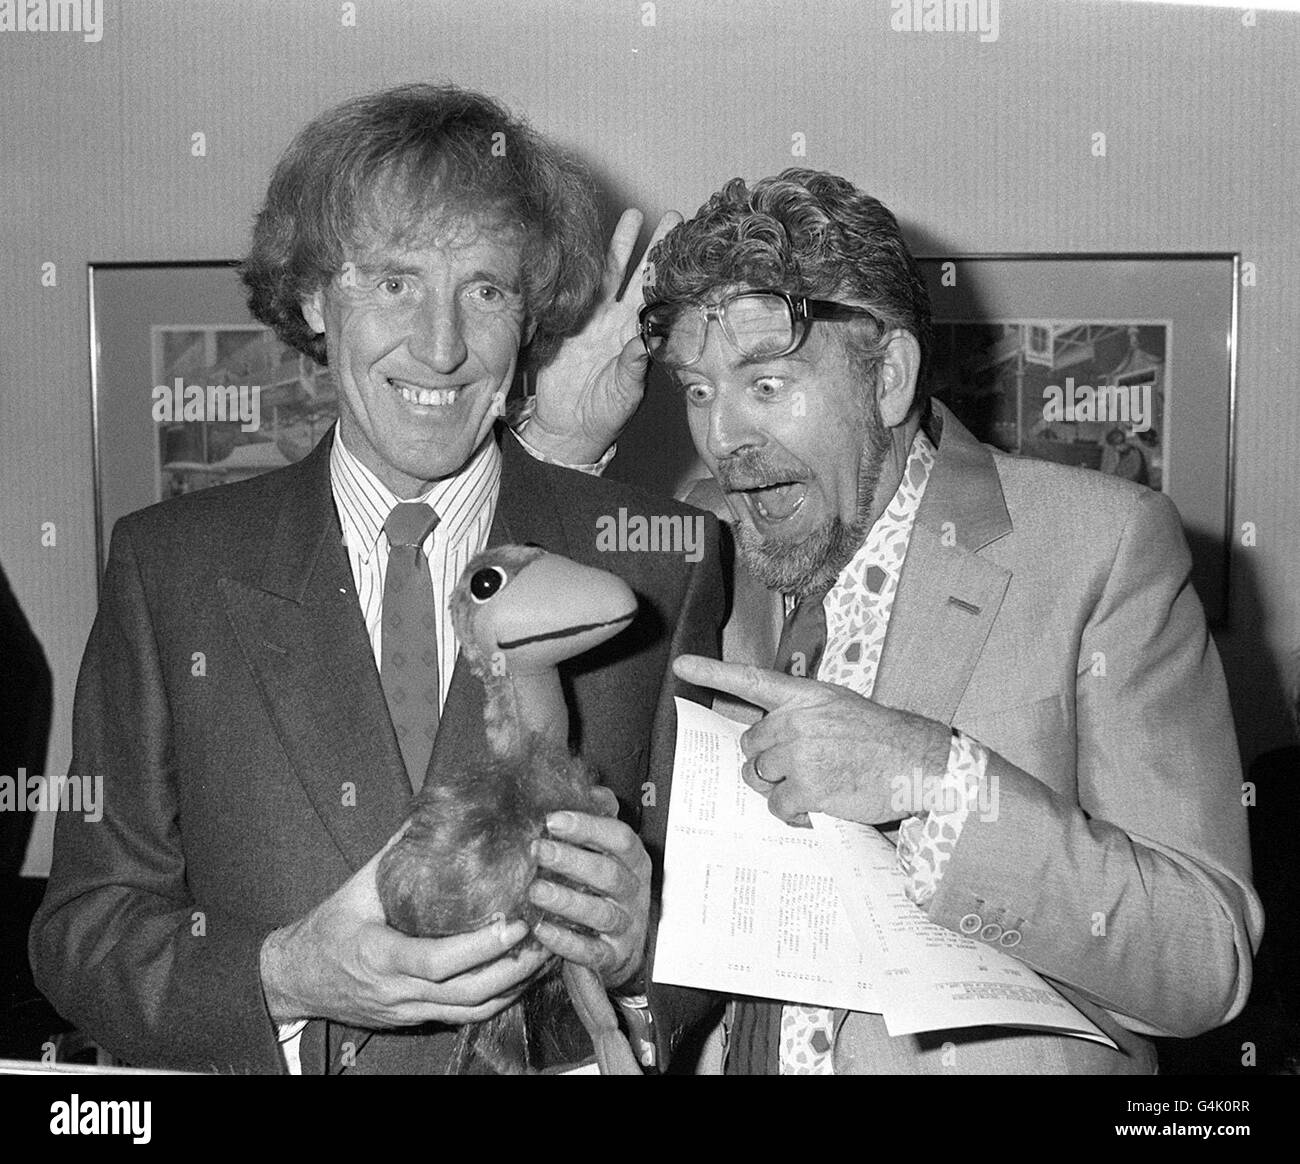 A surprise from TV star Rolf Harris with a character from his Australian homeland - a mini version of the infamous Emu held by entertainer Rod Hull. *17/3/1999: Hull, best known for his partnership with the puppet Emu, has died, Sky News reported Thursday March 17, 1999. Stock Photo